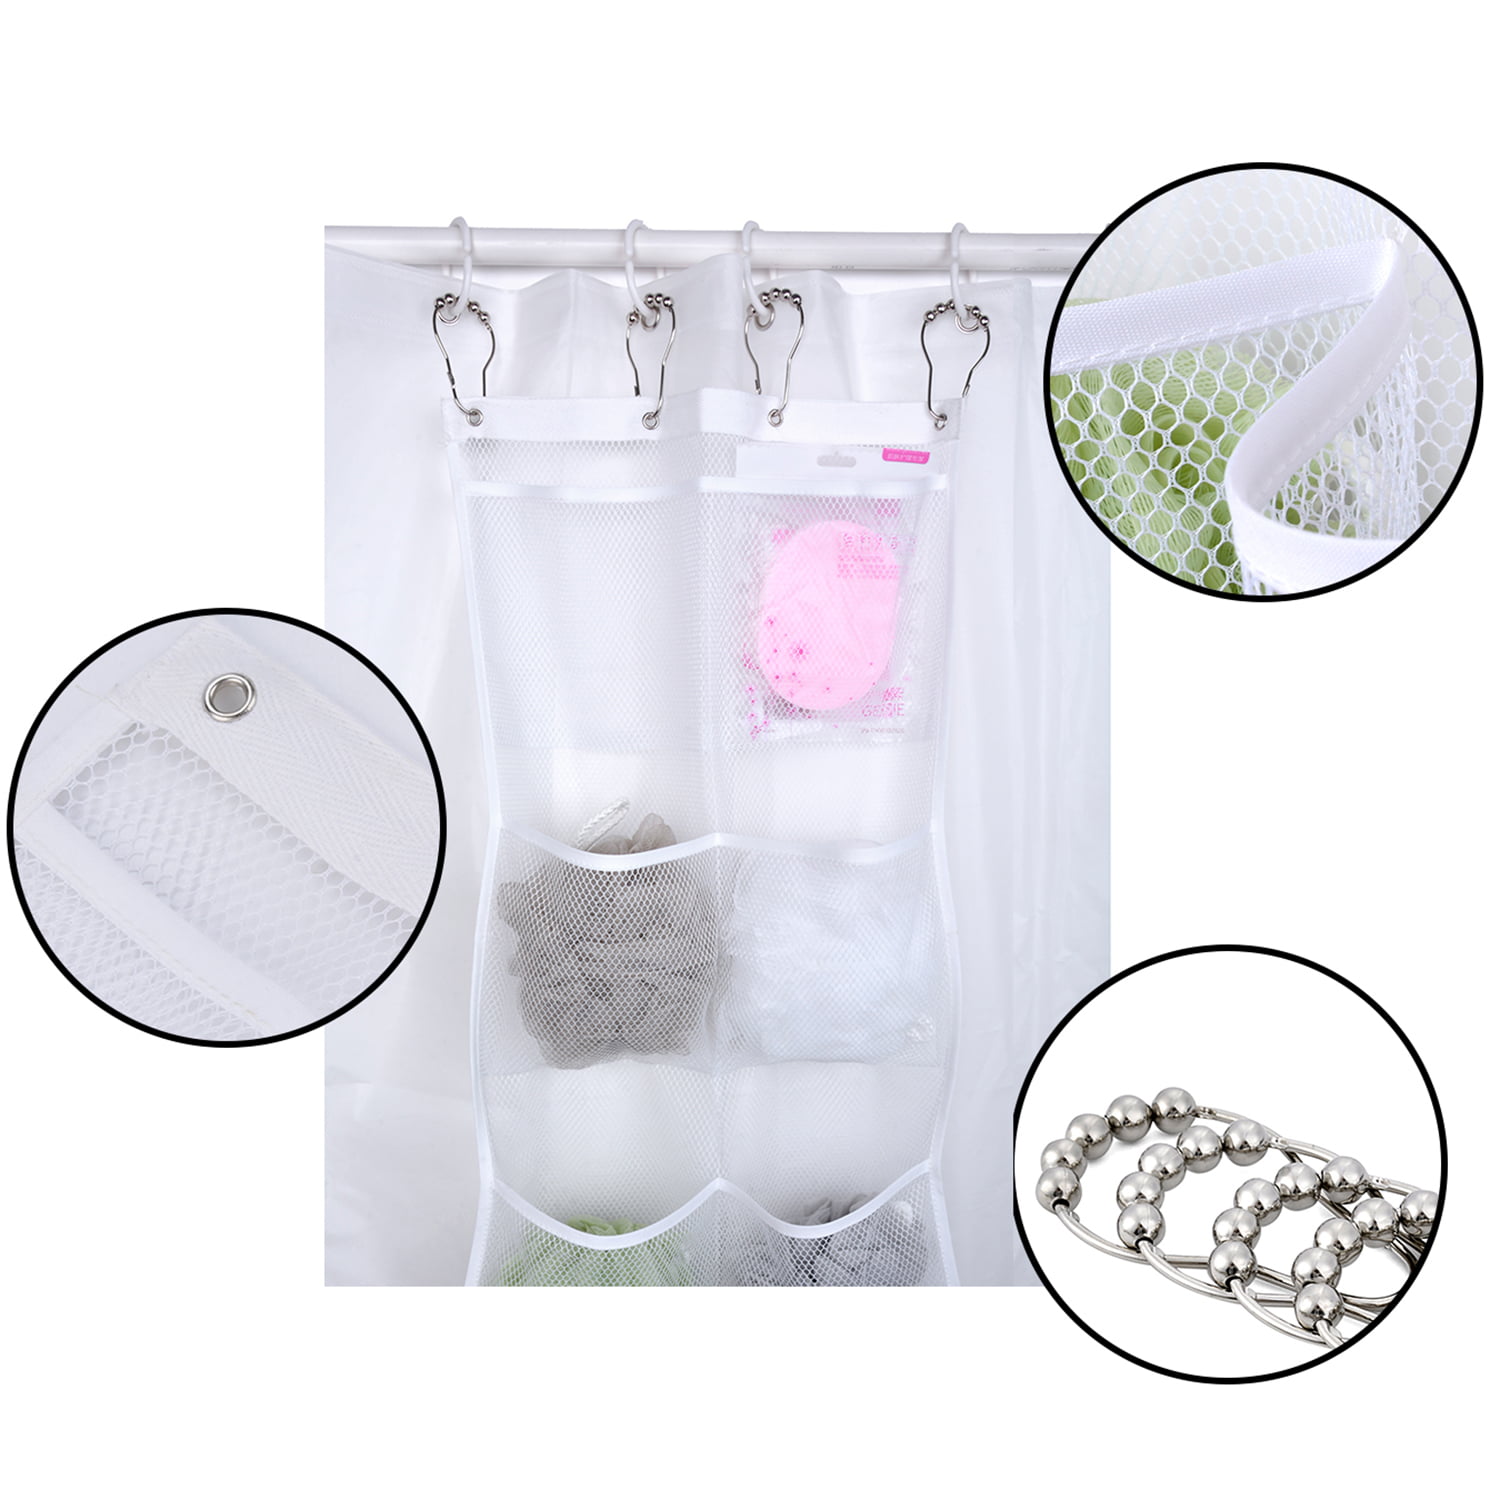 Bsagve 2 Pack Mesh Hanging Caddy Organizer with 6 Pockets